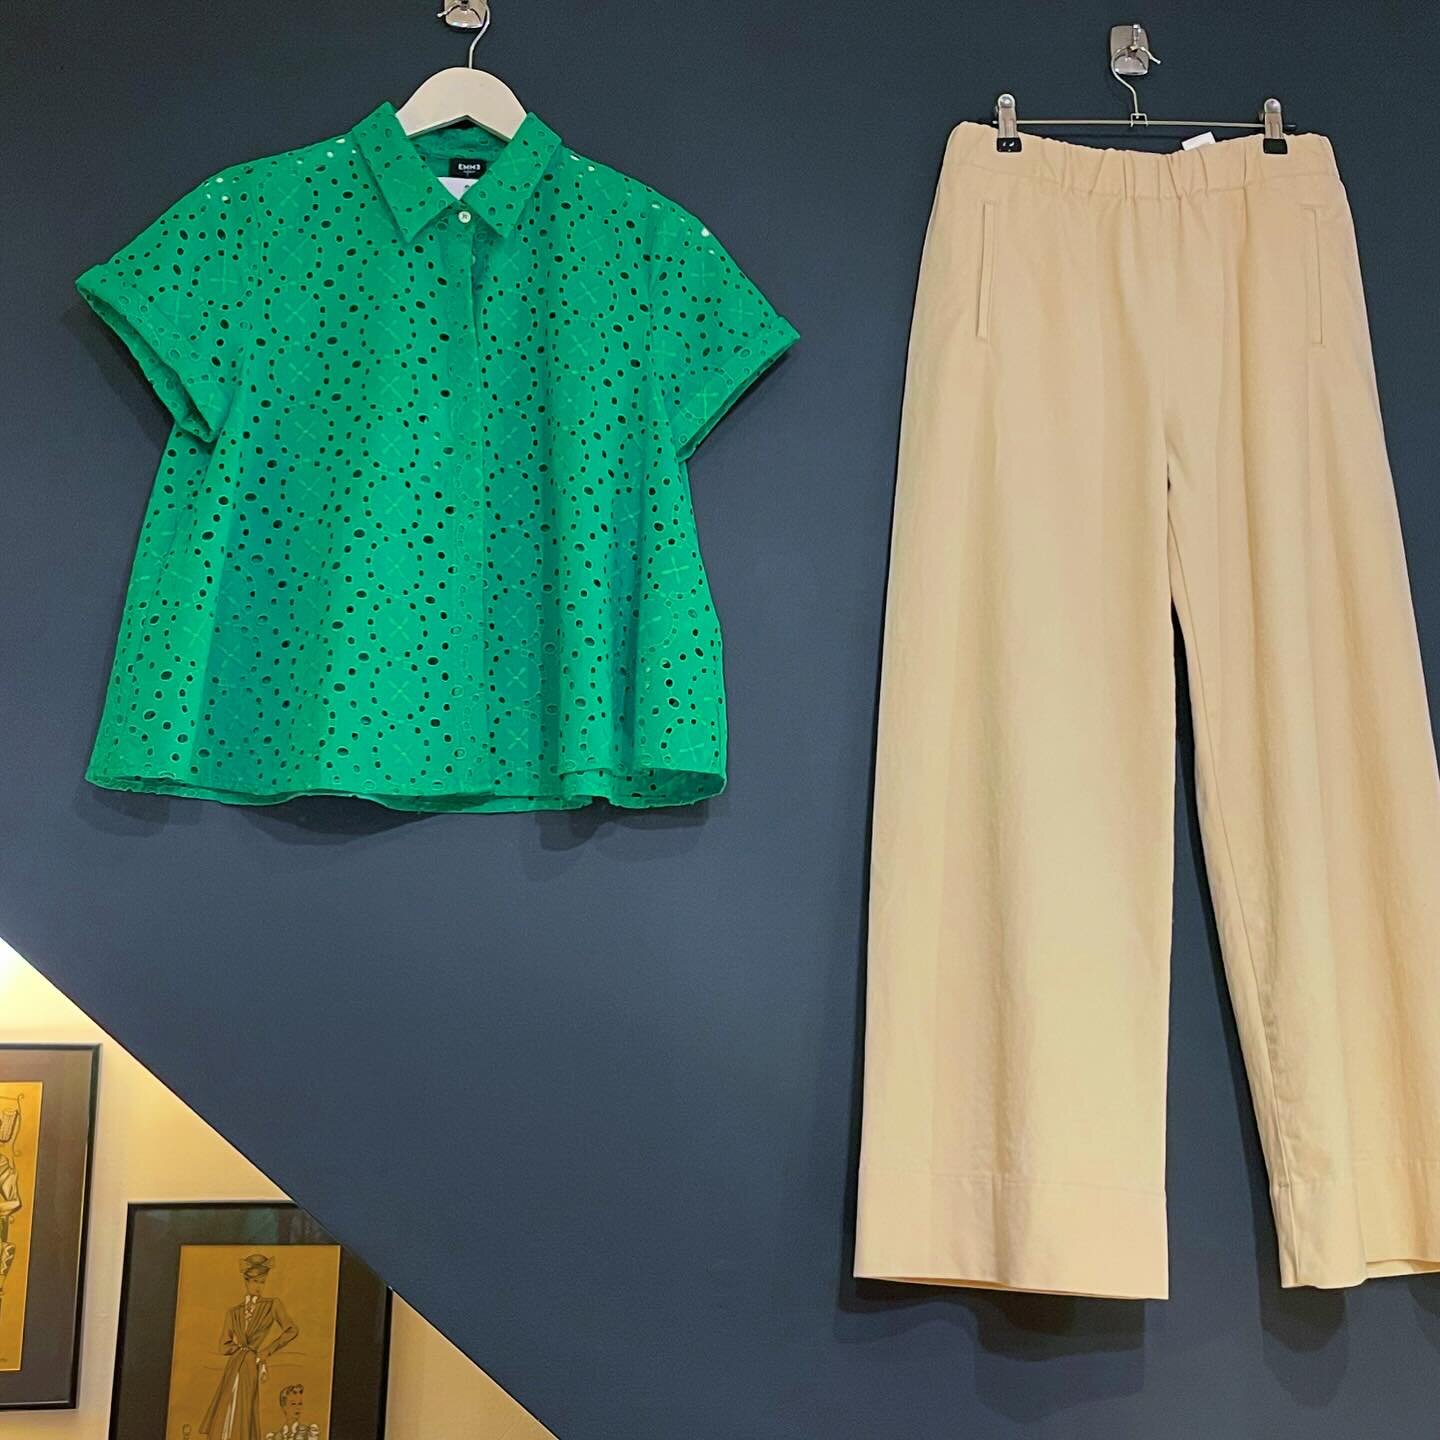 Happy Sunday!
We like to move on and not repeat ourselves too often, however, occasionally some things are just too good not to bring back.
These two little beauties are a case in point. The gorgeous broderie anglais shirt was a firm favourite a few 